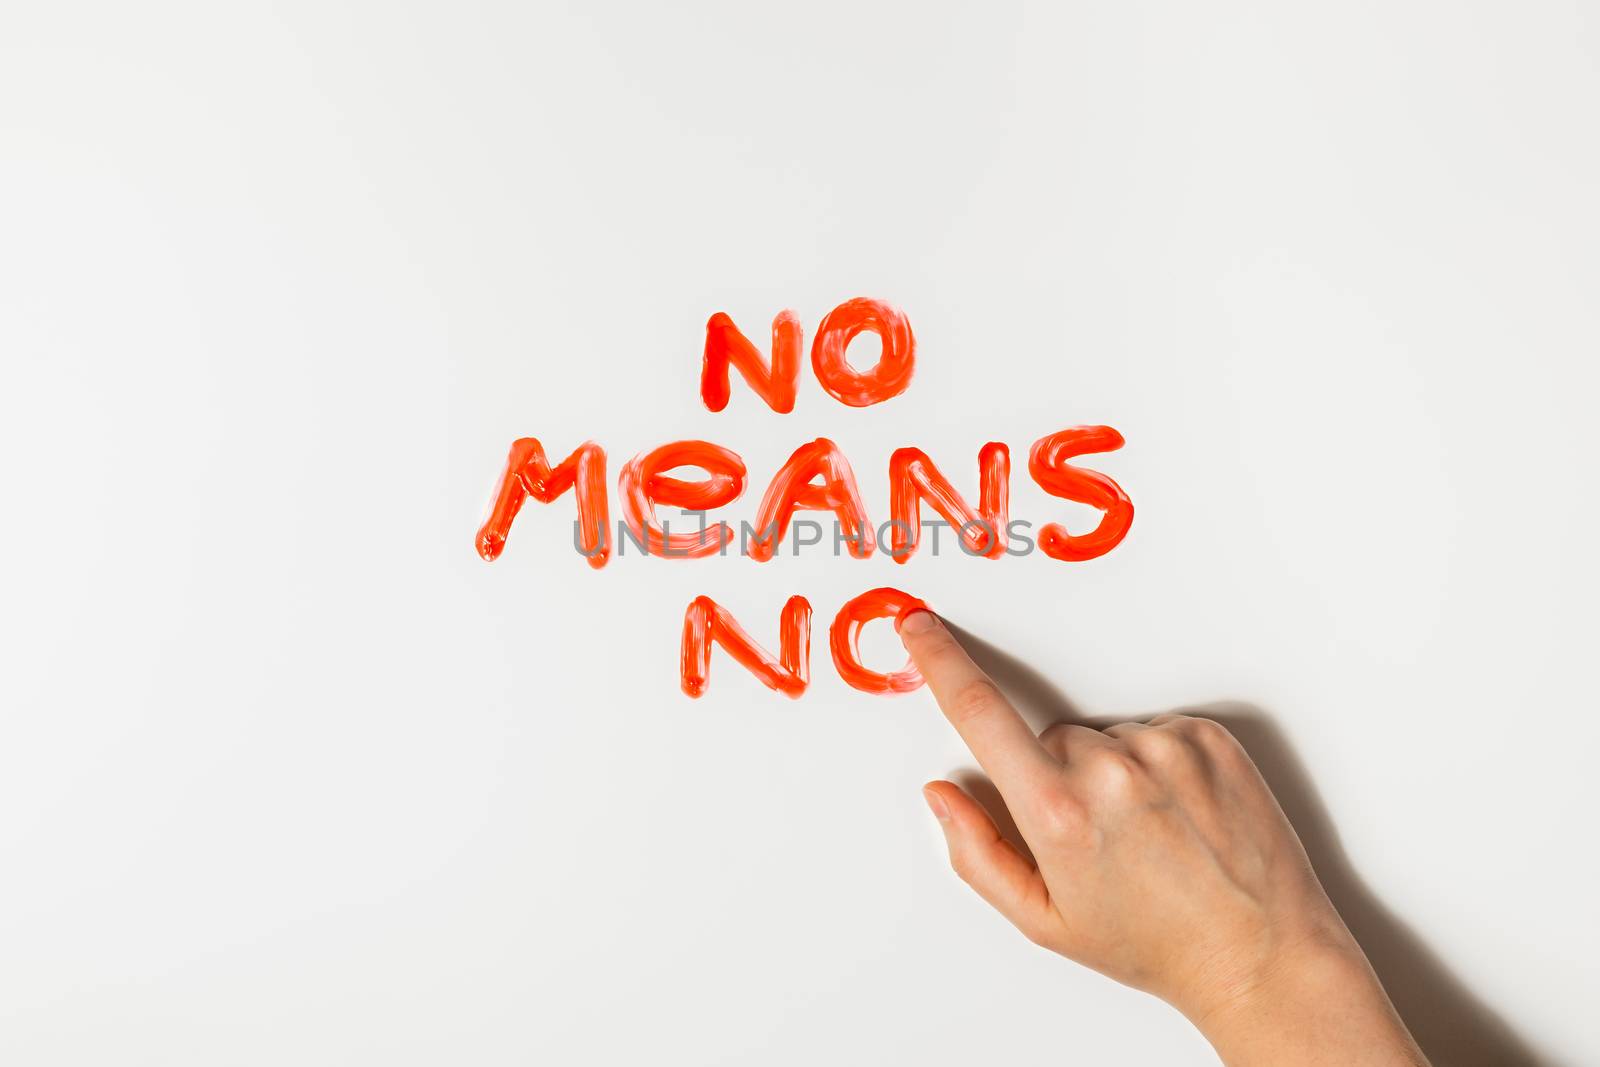 Women finger draws a phrase "No means no" with red paint on a white background. Sexual abuse, rape prevention and personal boundaries concepts.